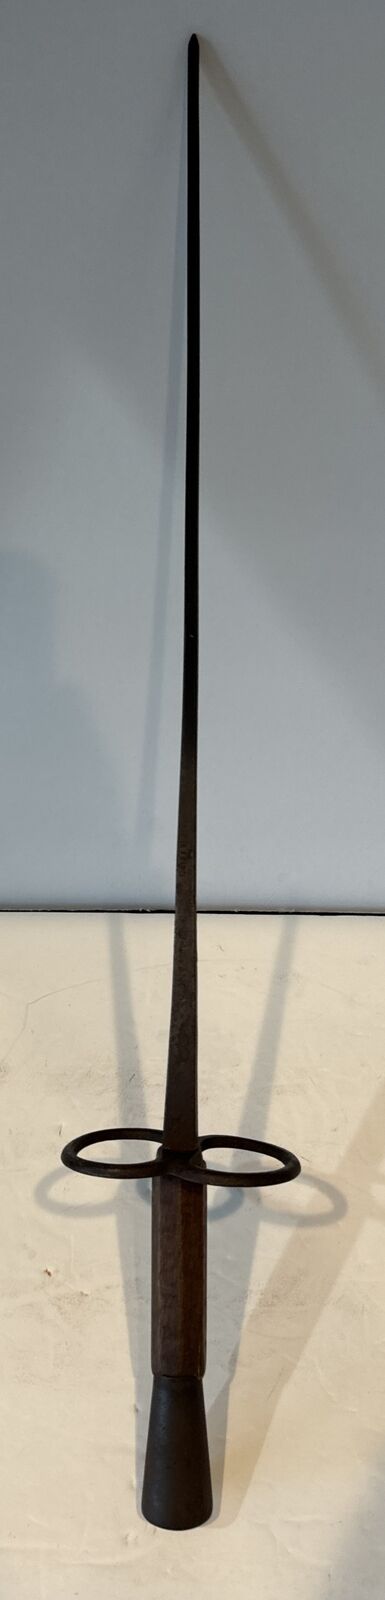 Partridge Boston Fencing Sword Made in France Antique 22” Long #5 Rare HTF Piece